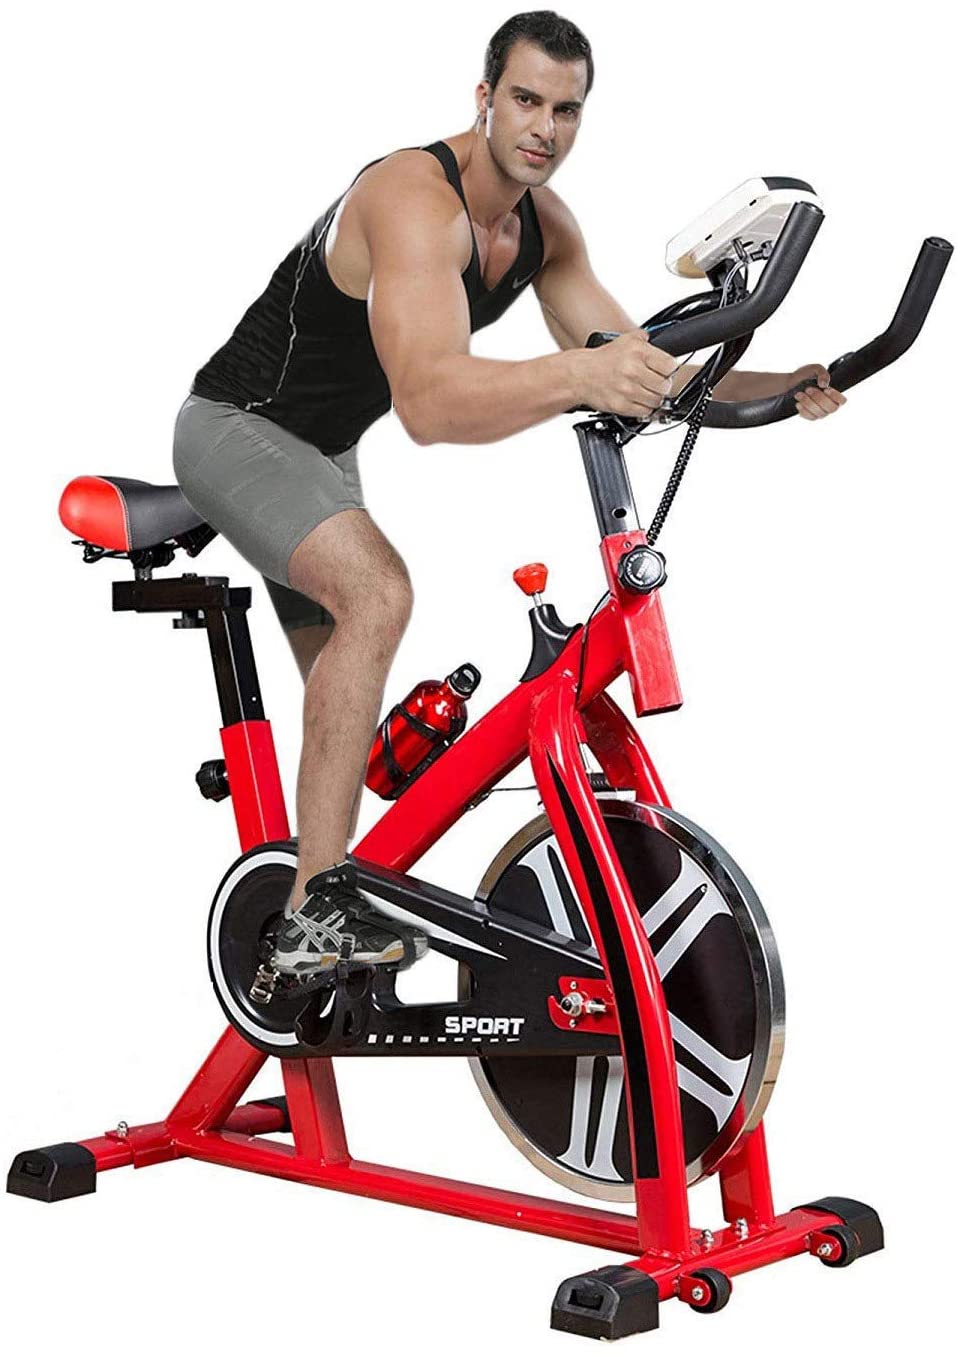 (Out of Stock) Upgraded Spinning Bike Home Fitness Equipment Indoor Silent Bicycle,Basic Sports Bike